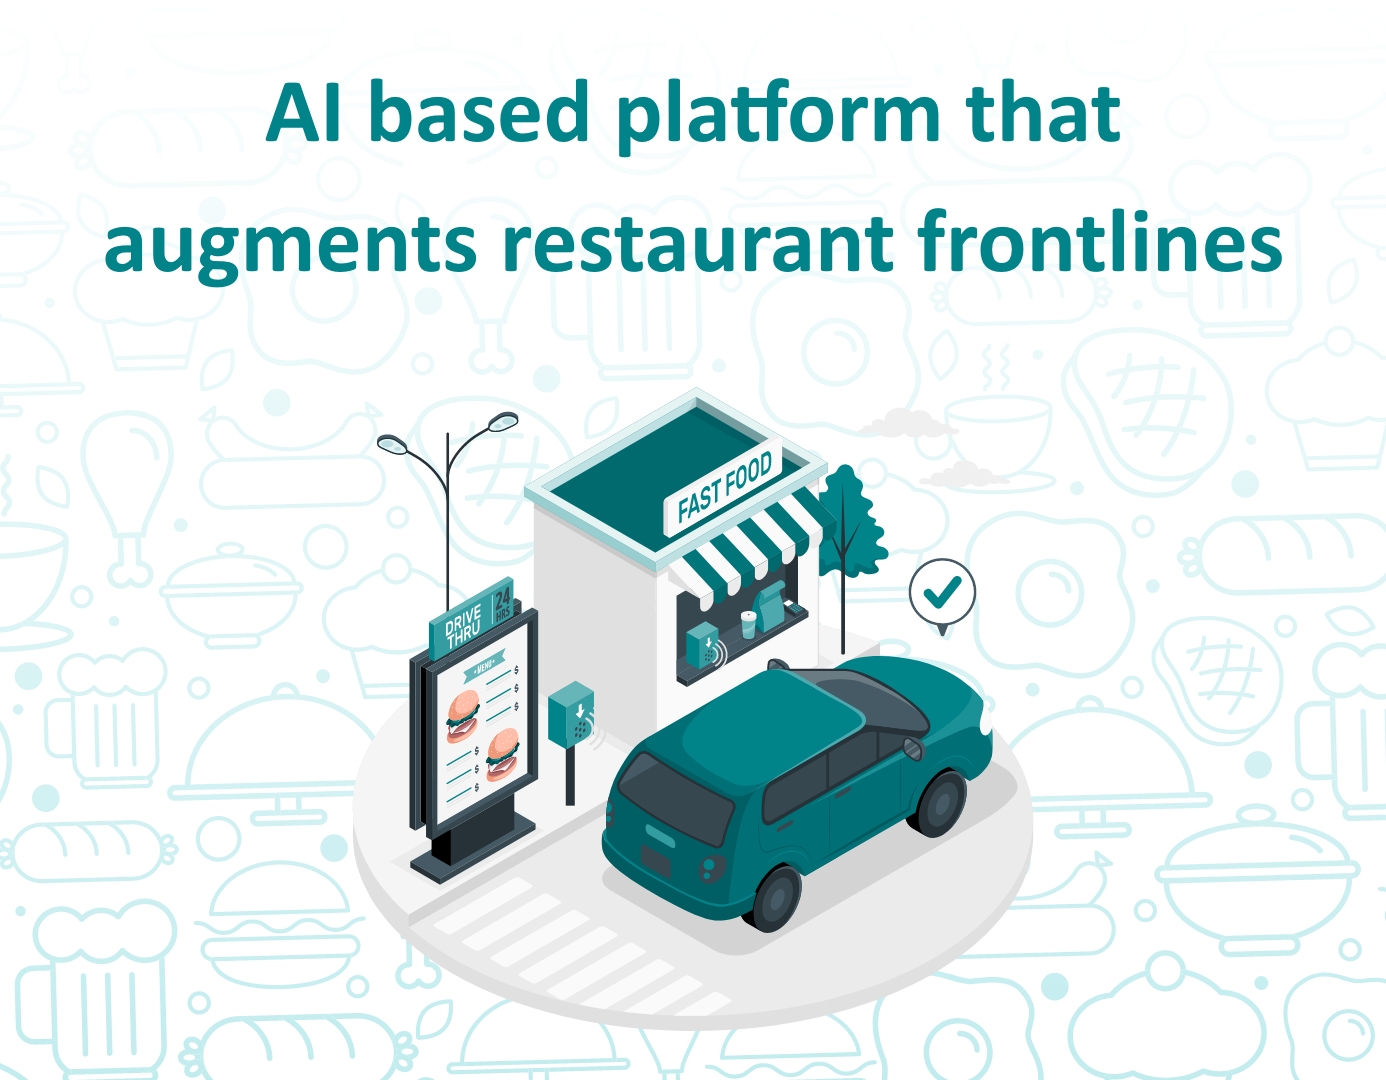 AI platform boosting restaurant frontline operations - enhancing efficiency and customer experience through automation and smart insights